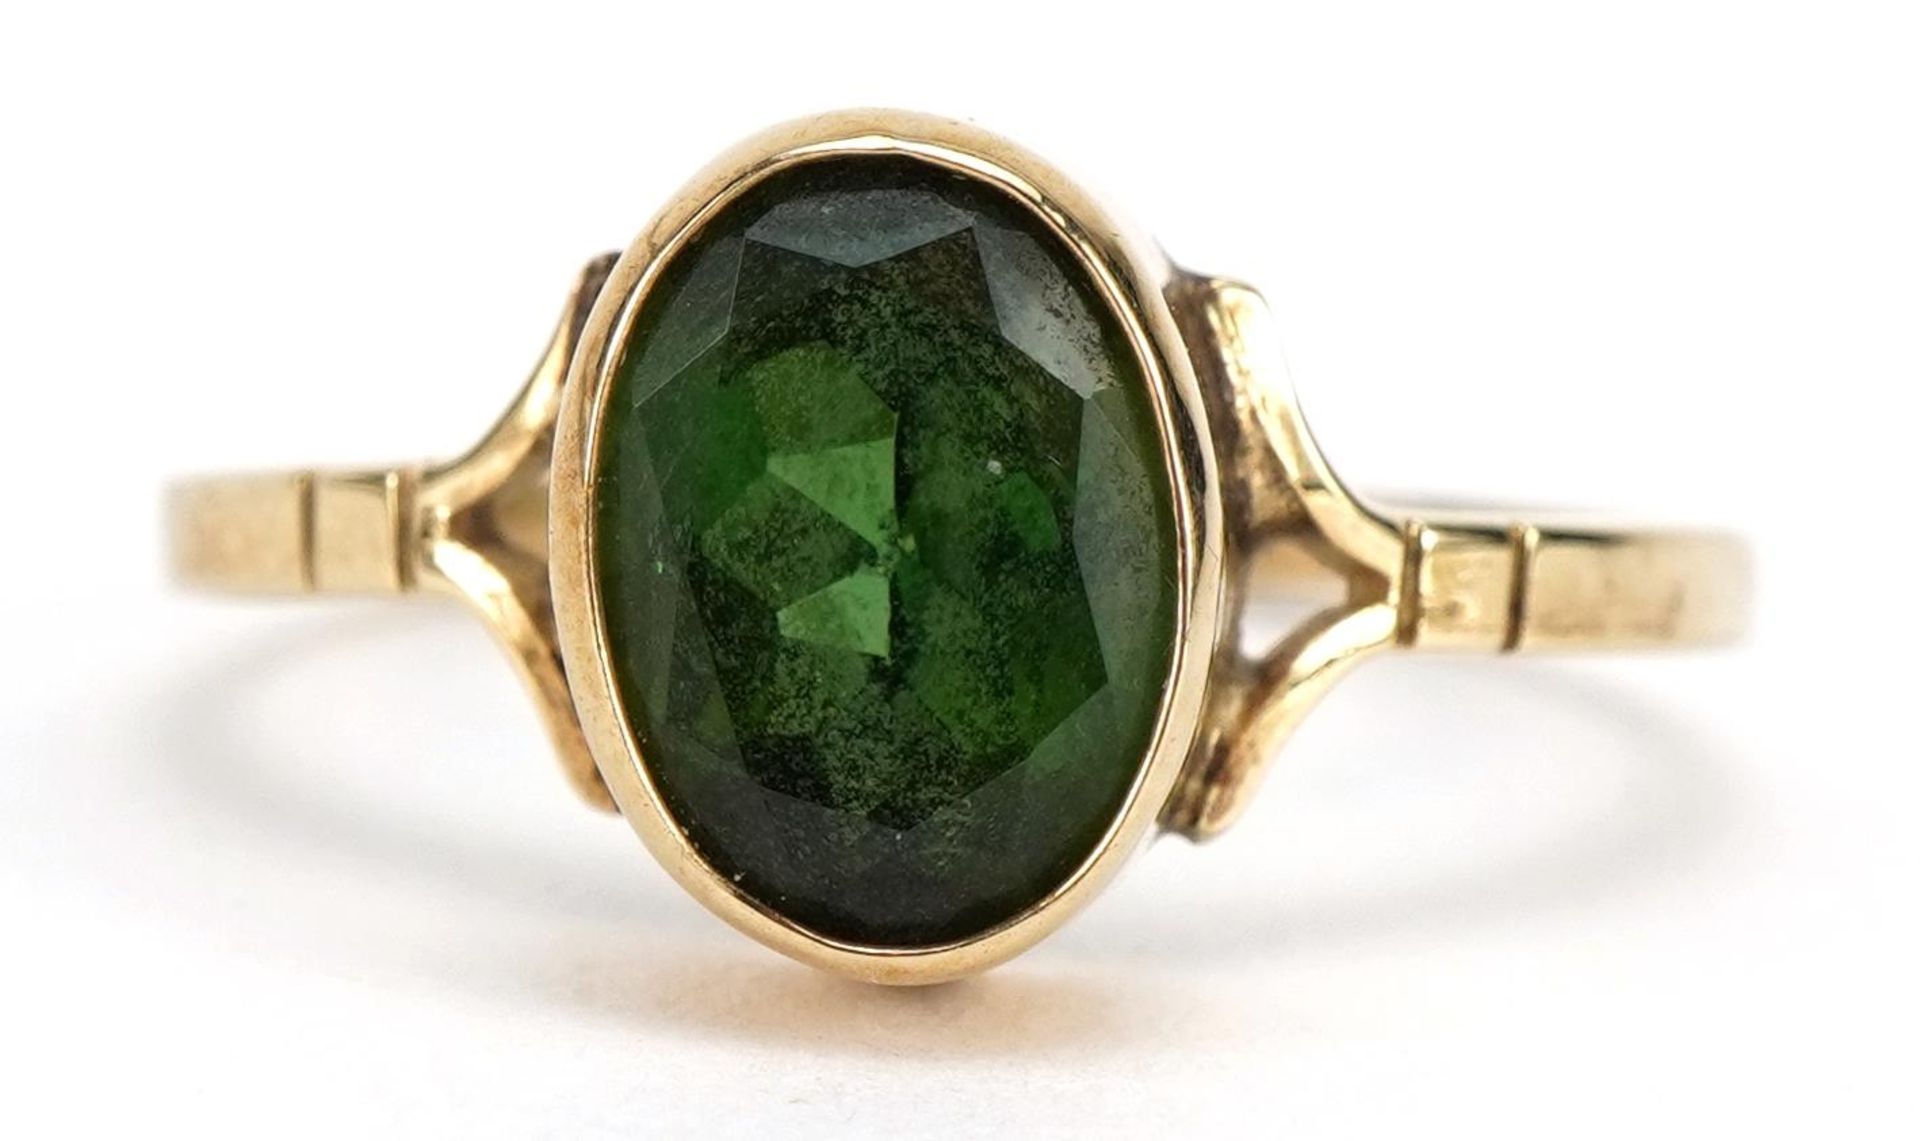 9ct gold green stone solitaire ring with split shoulders, probably olivine or tourmaline, size N,